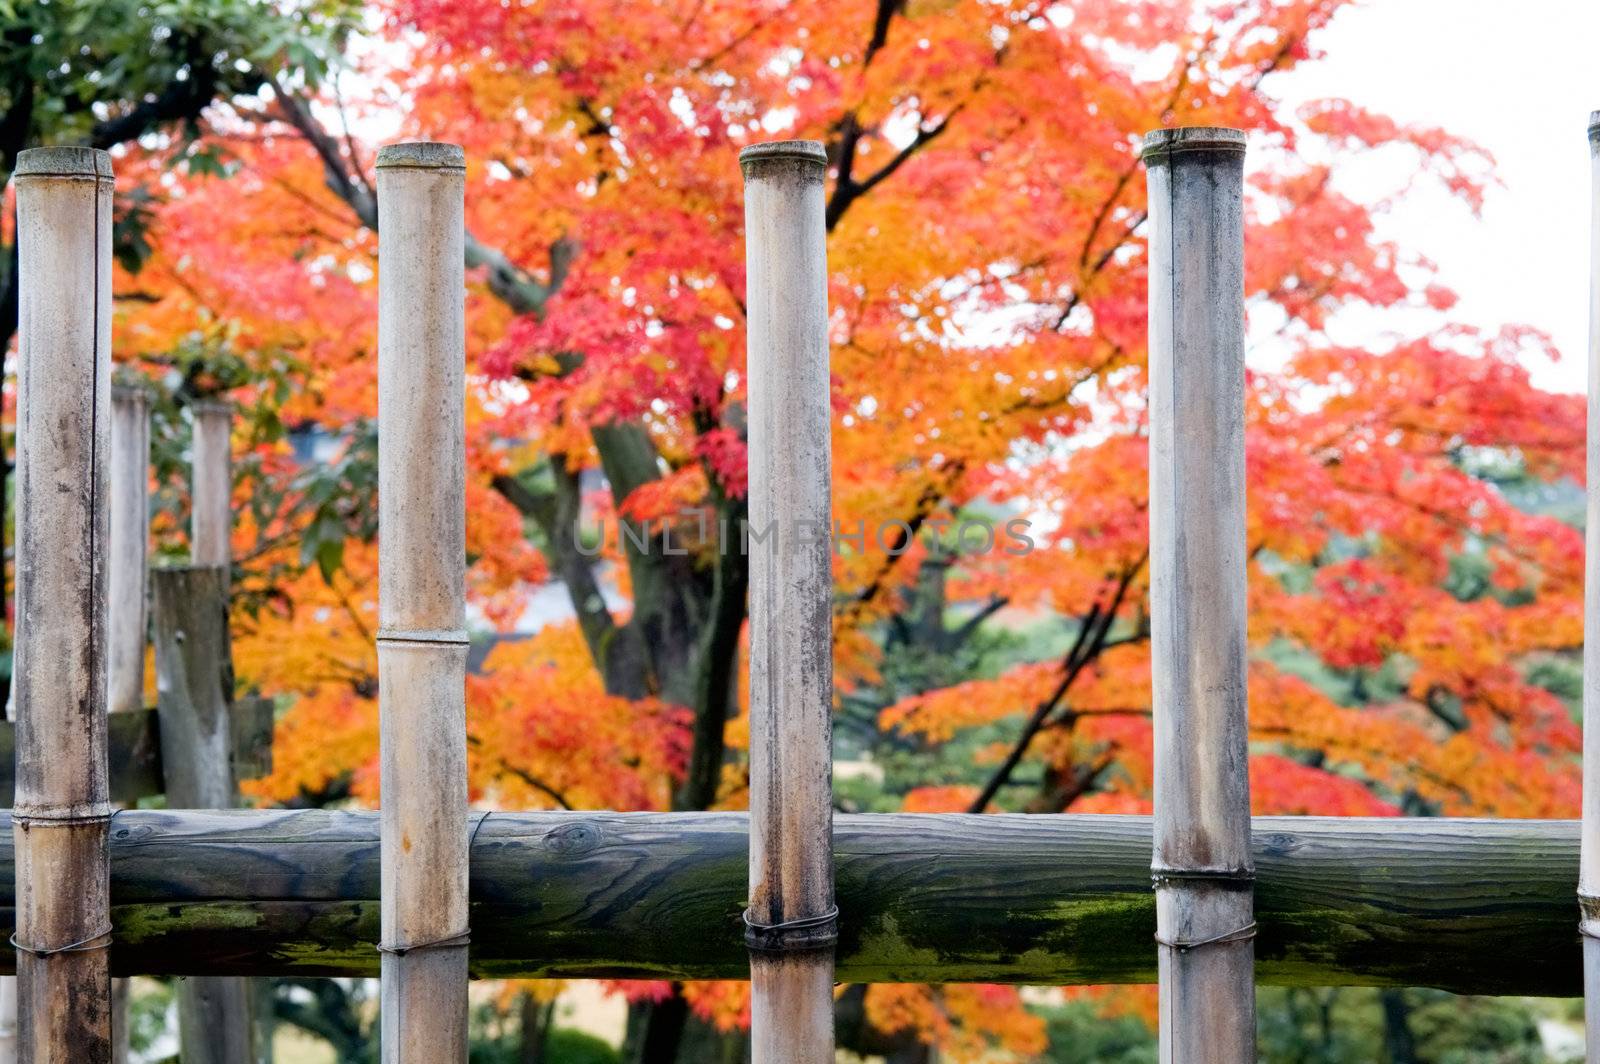 The bamboo fence at Japanese garden over red leafs, in fall